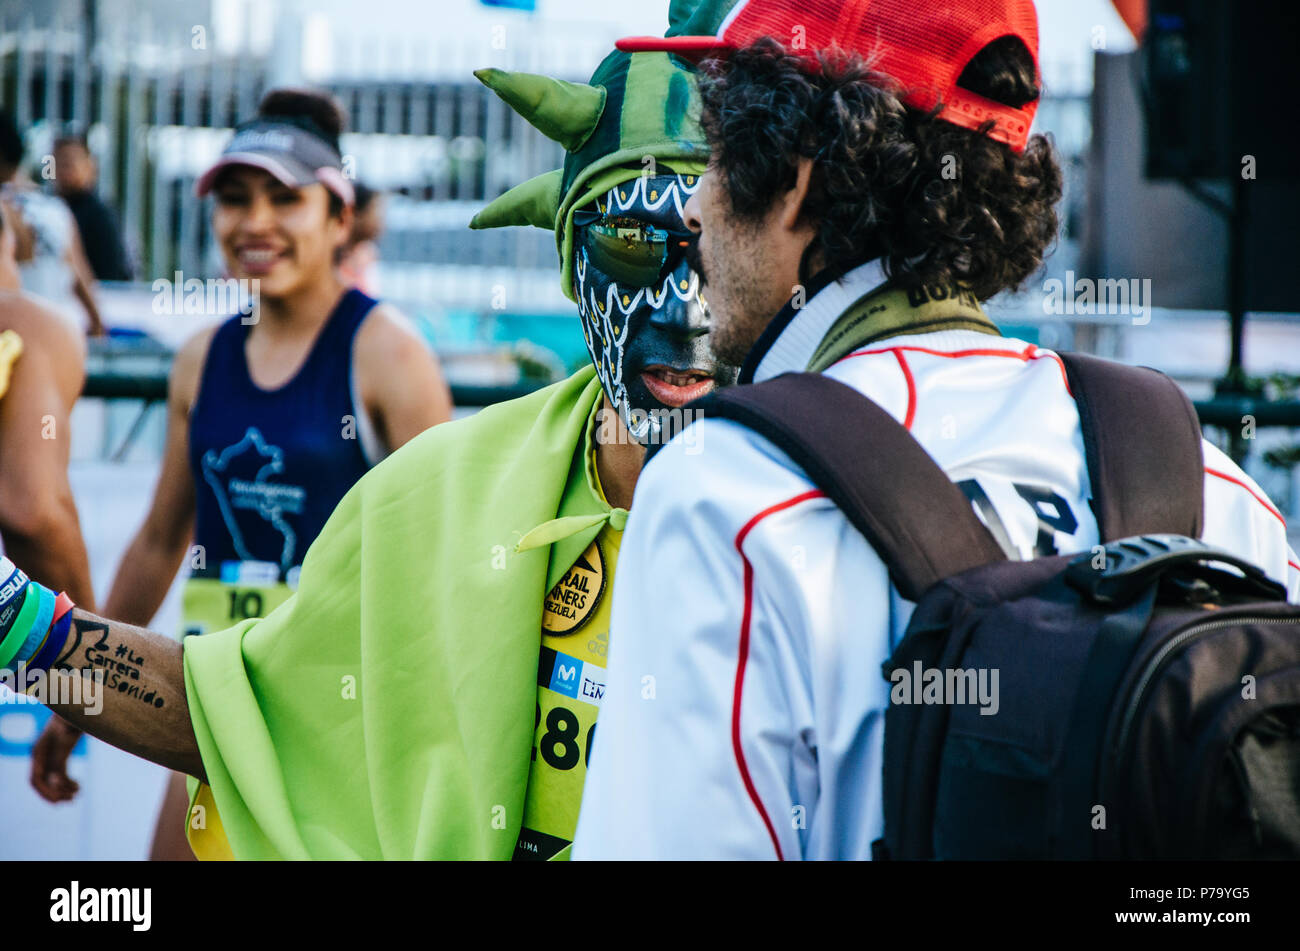 Lima, Peru - May 20th 2018: Marathon Lima 42k, sporting event that gathers athletes from all over the world. The eccentric athletes Stock Photo